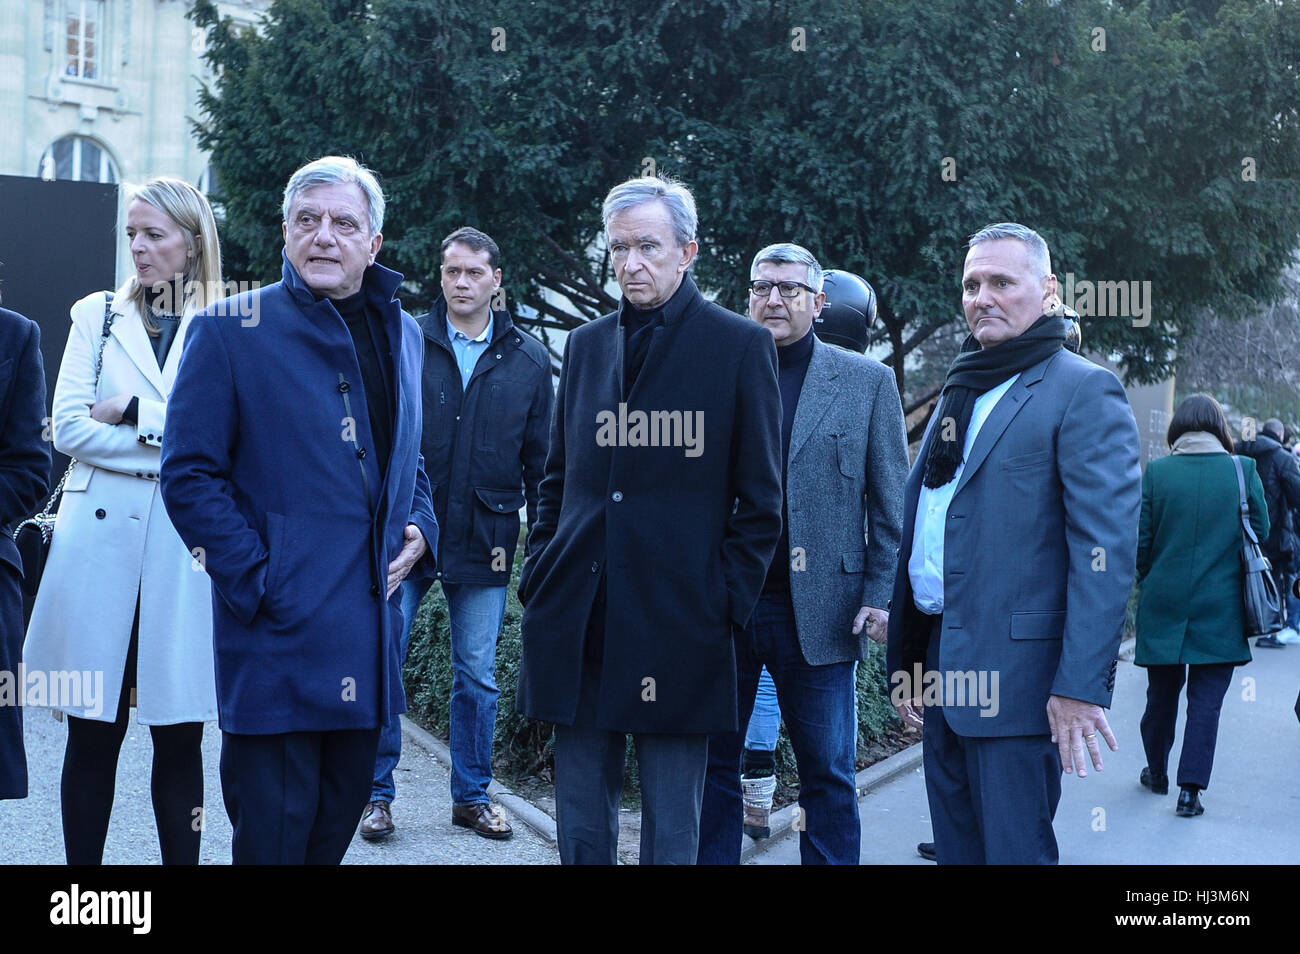 Paris, France. 21st Jan, 2017. (from LtoR) CEO Dior, Sidney Toledano, Owner  of LVMH Luxury Group Bernard Arnault are seen arriving at Dior Fashion Show  during Paris Fashion Week Credit: Gaetano Piazzolla/Pacific